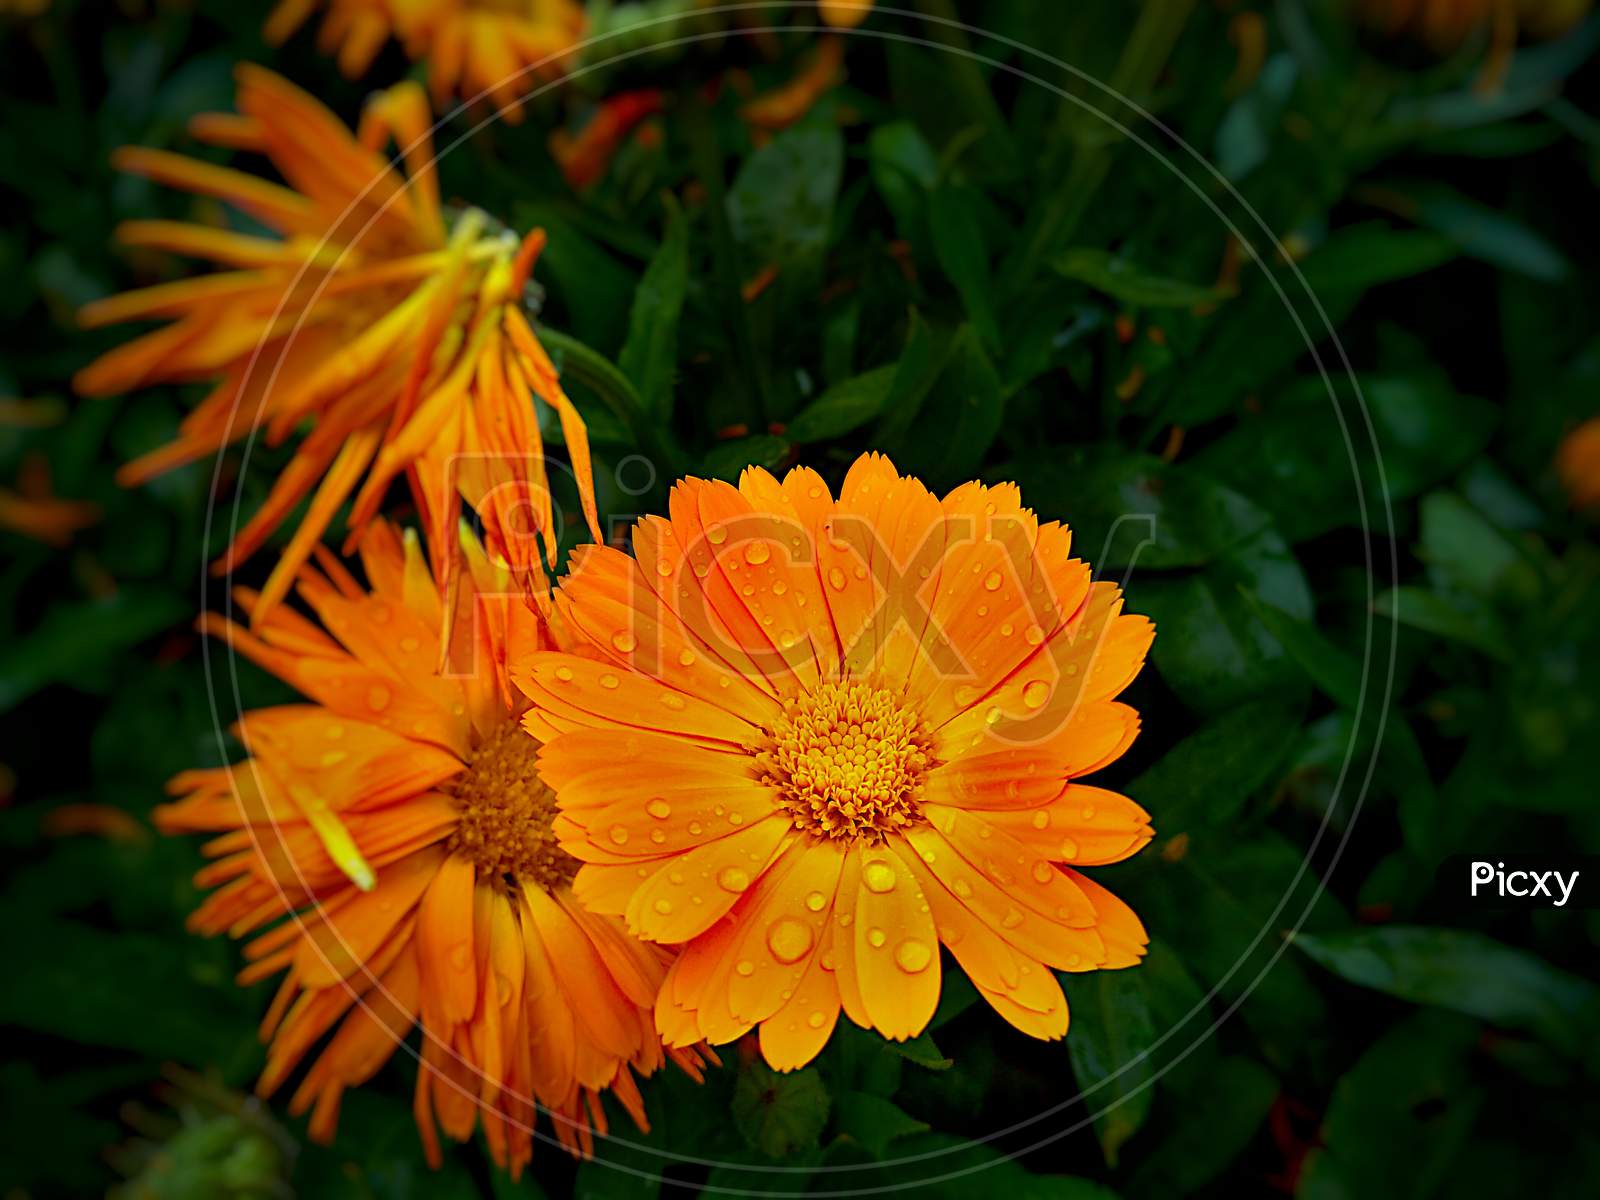 Closeup view of pot marigold flower with rain drops, it is very similar to transvaal daisy flower and calenduleae flower.